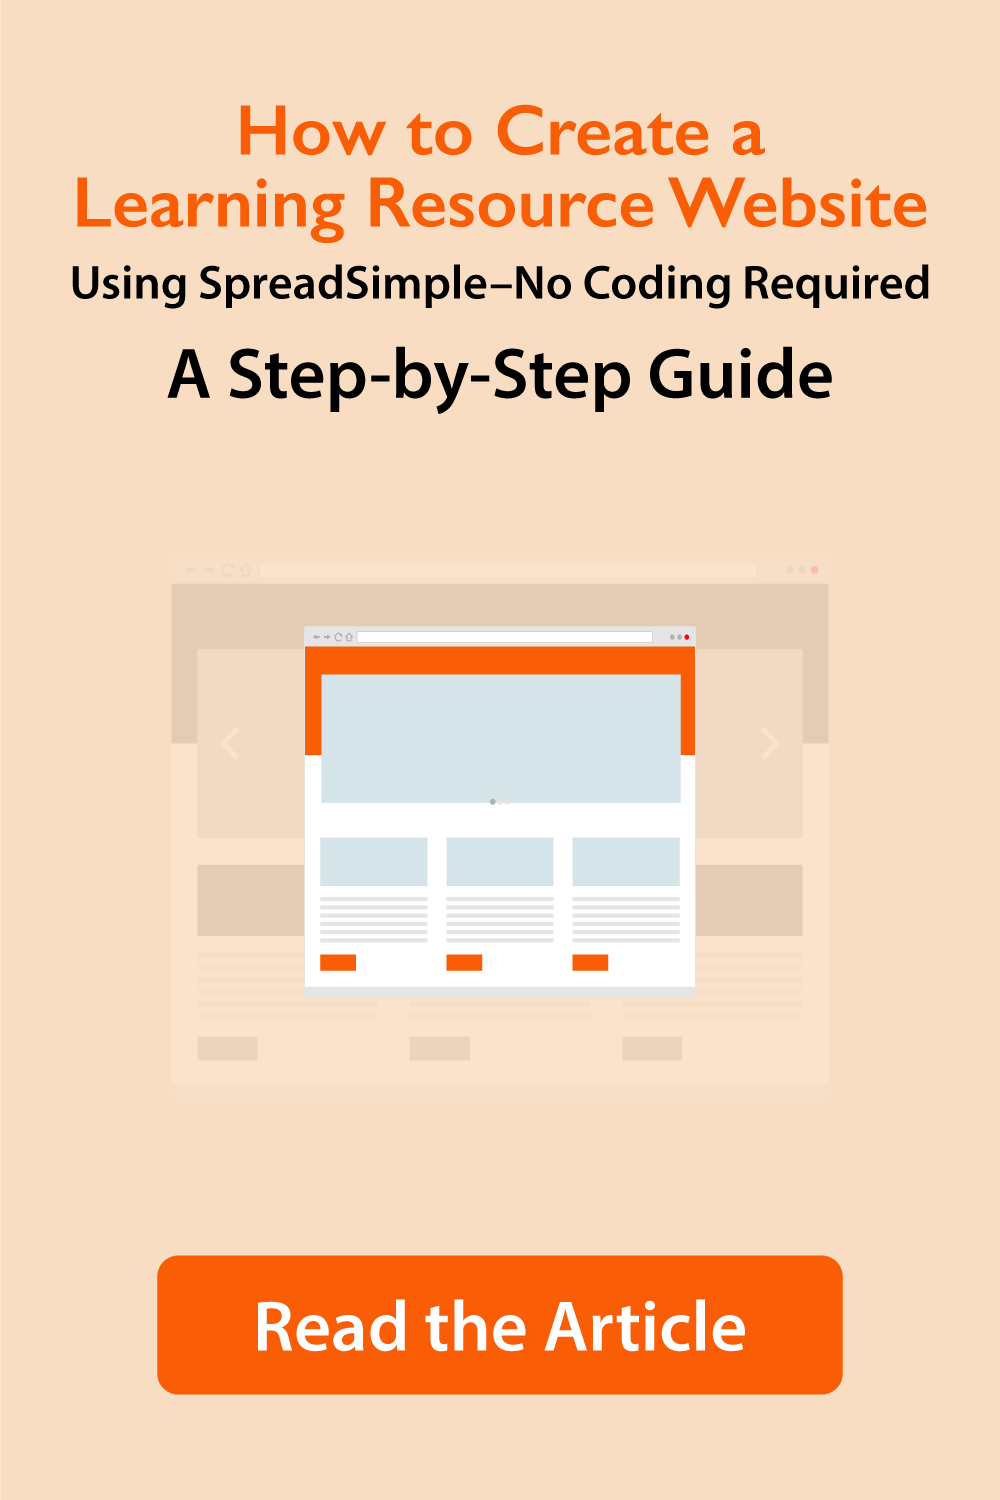 How to Quickly Create a Learning Resource Website Using SpreadSimple-No Coding Required